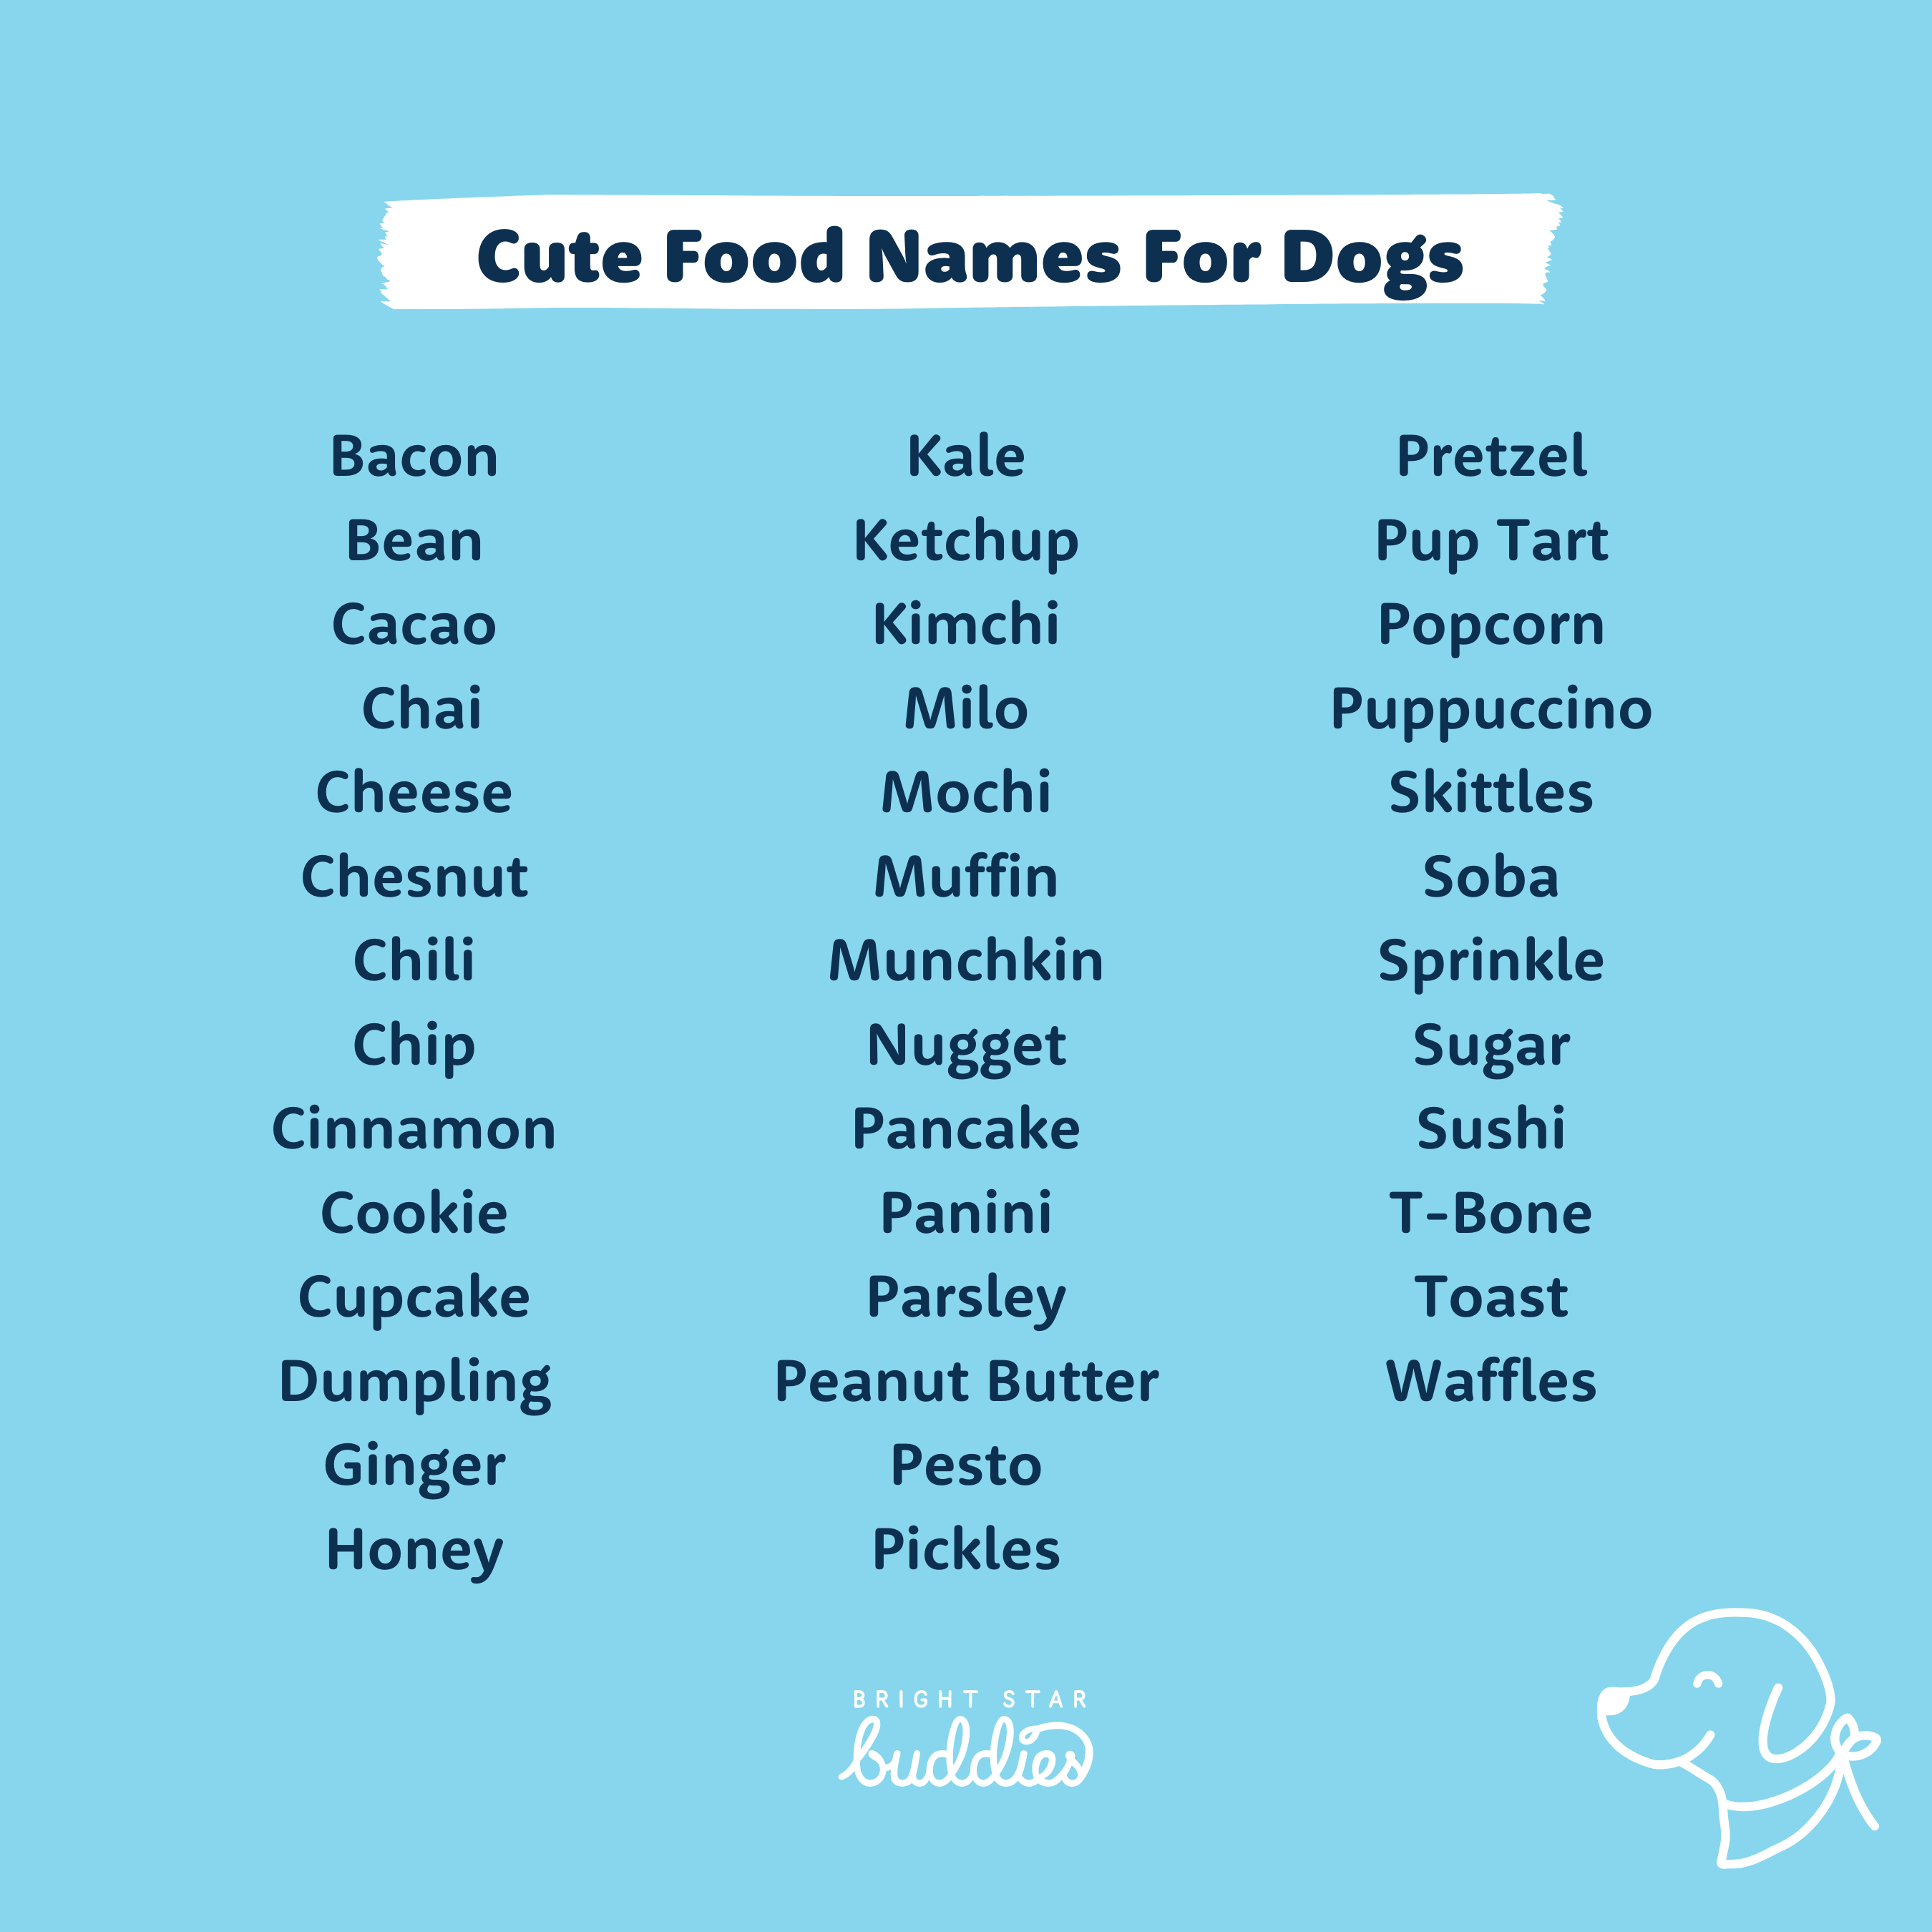 Cute Food Names For Dogs Clearance Seller, Save 63% | jlcatj.gob.mx